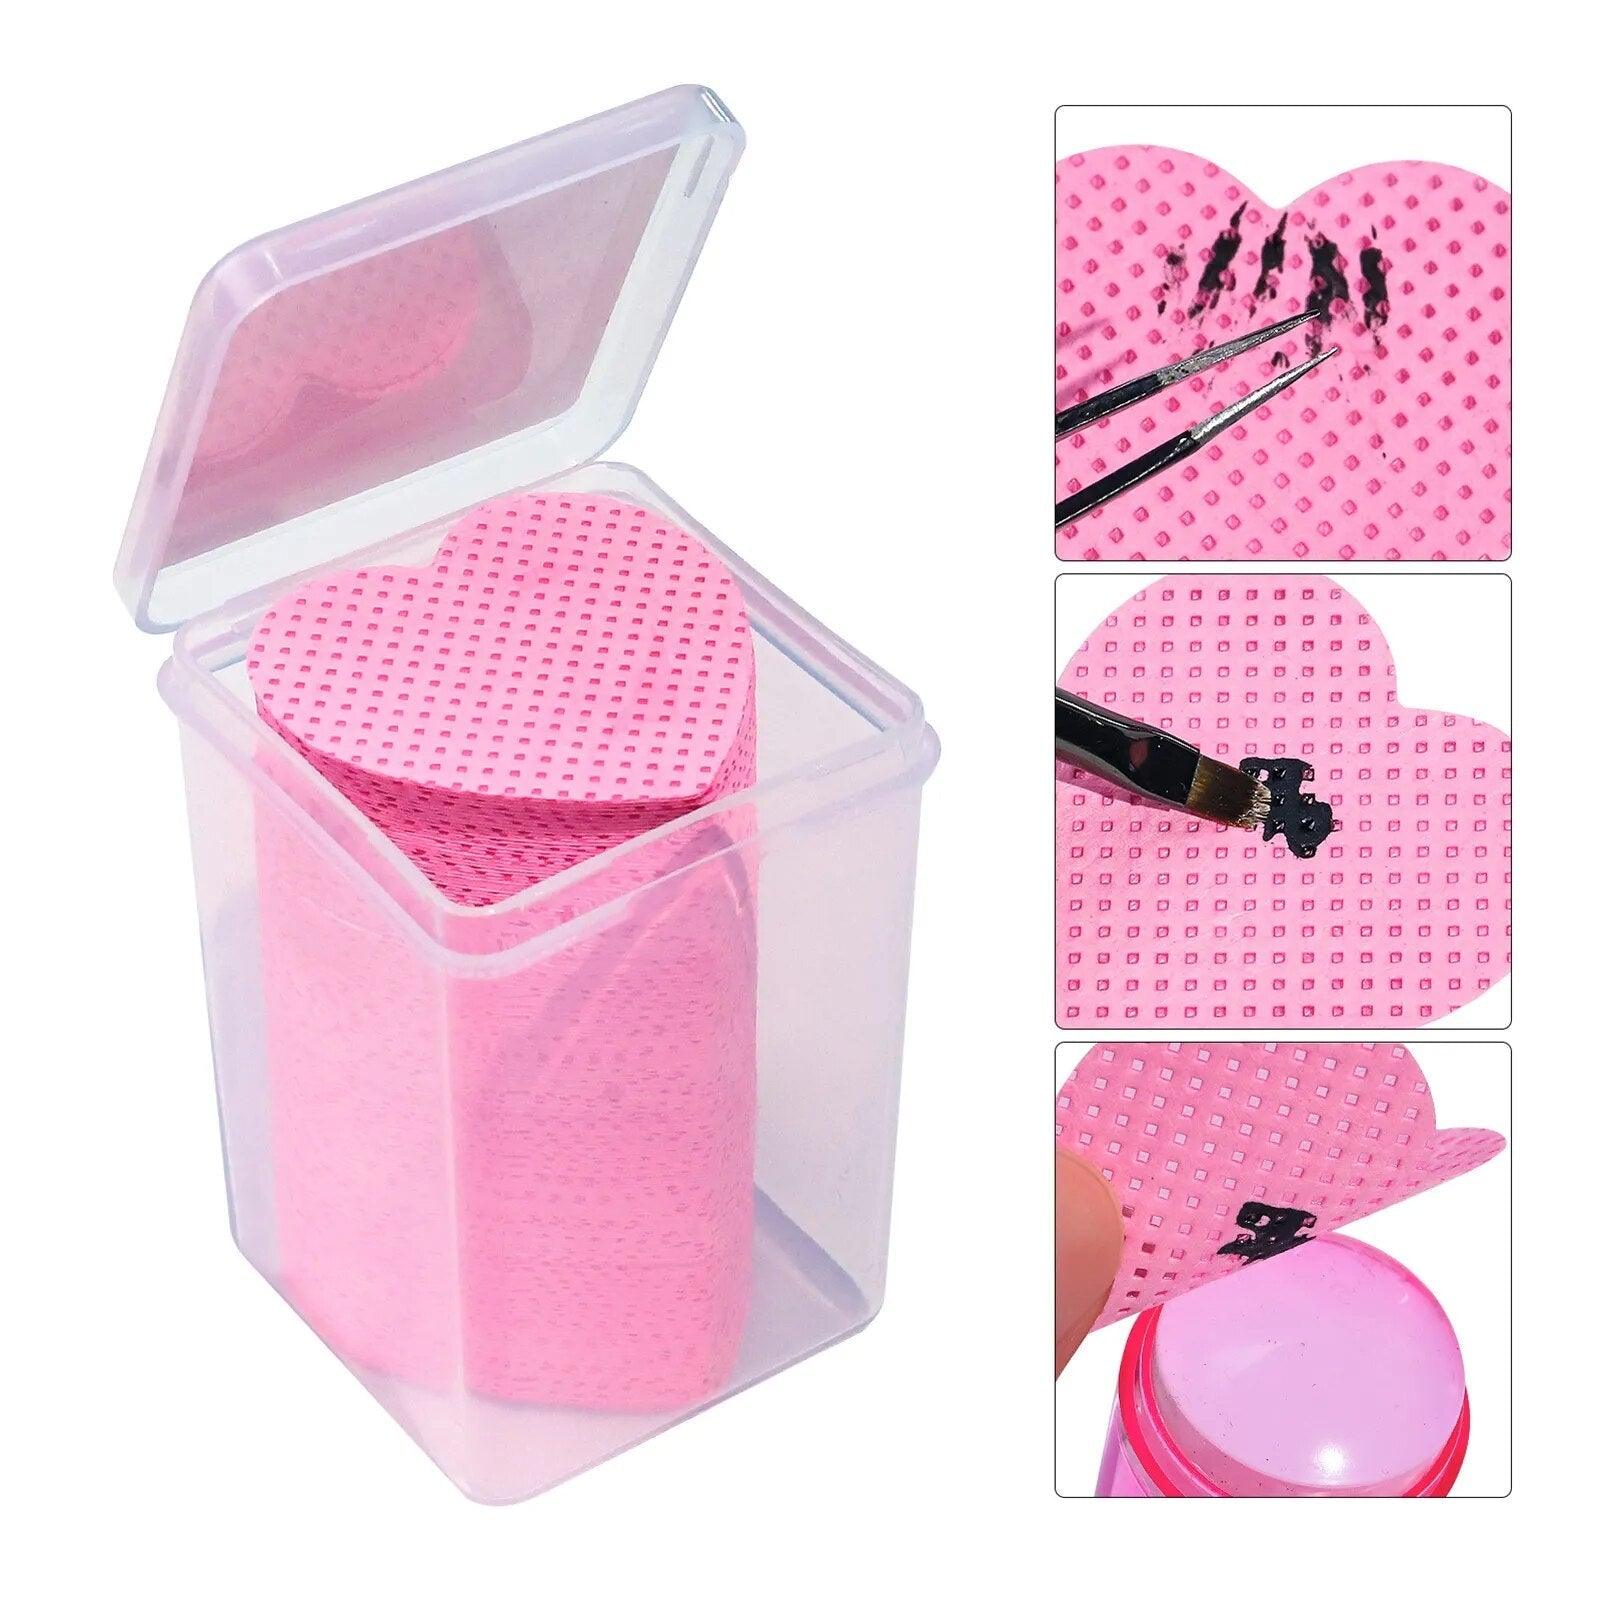 200pcs/Box Lint Free Nail Wipes Napkins Nail Art Gel Polish Remover Pink Heart Shape Paper Cotton Pads Manicure Cleaning Tools - Noovaluxe